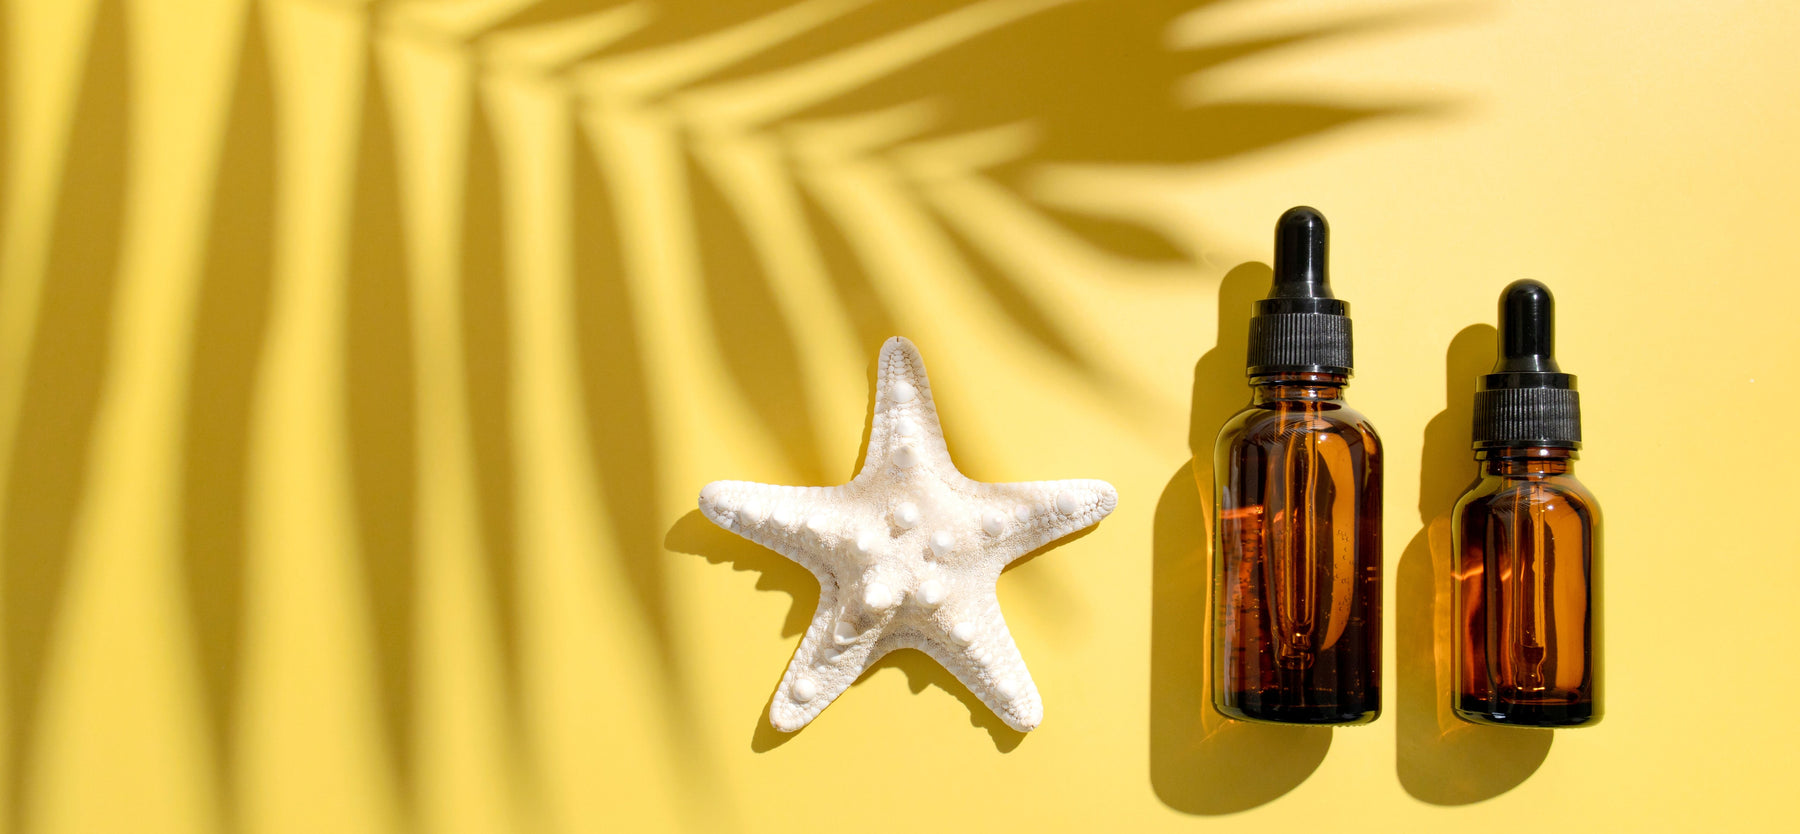 two bottles of essential oils on yellow sand with starfish